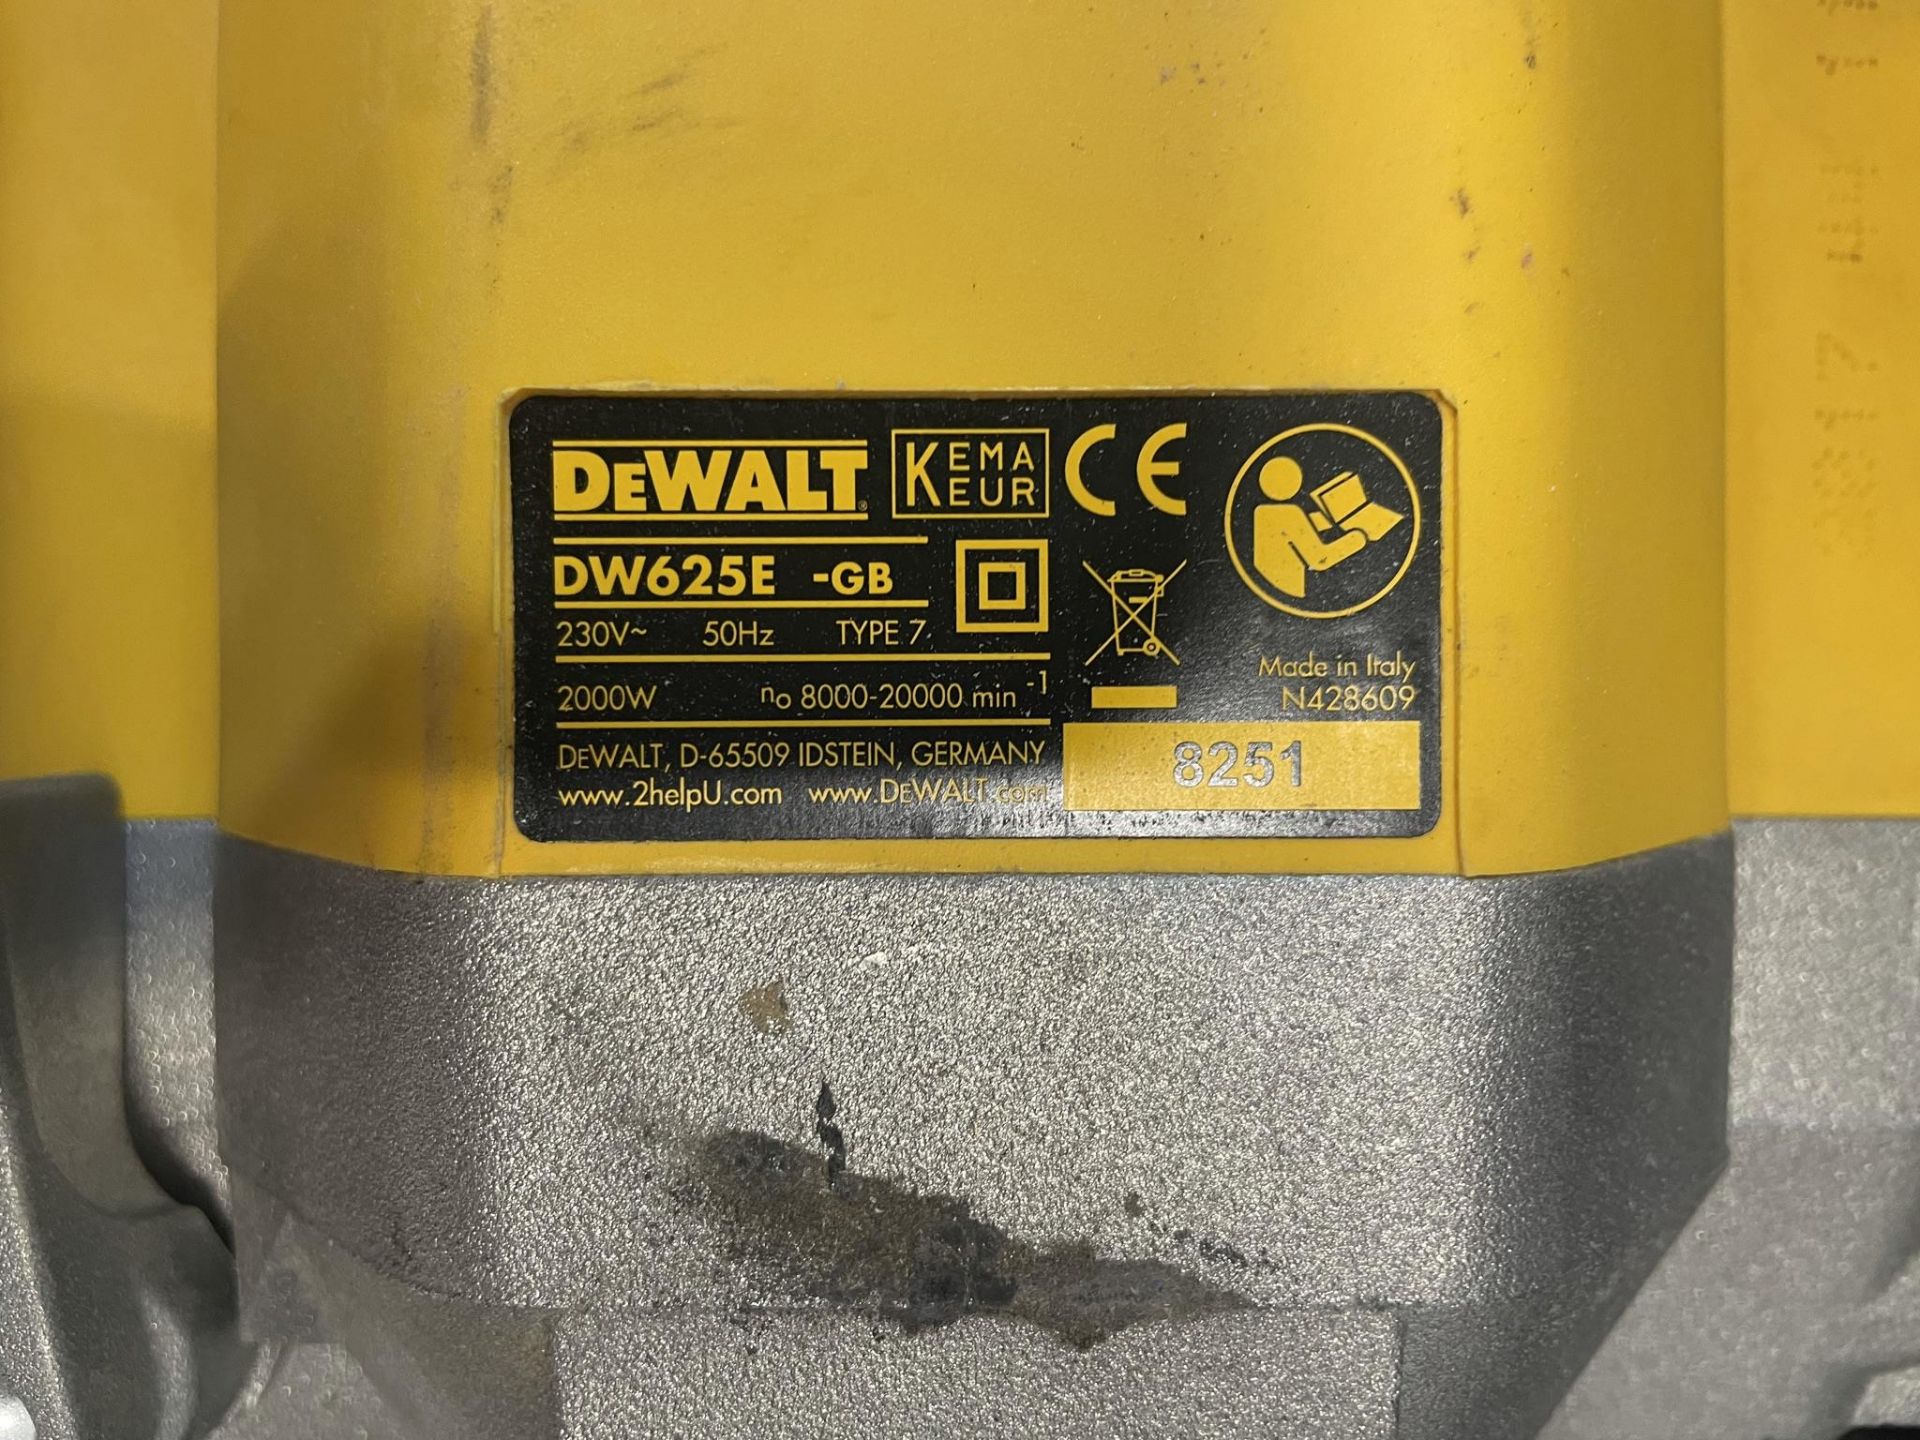 Dewalt DW625E Variable Speed Router in Case - Image 4 of 4